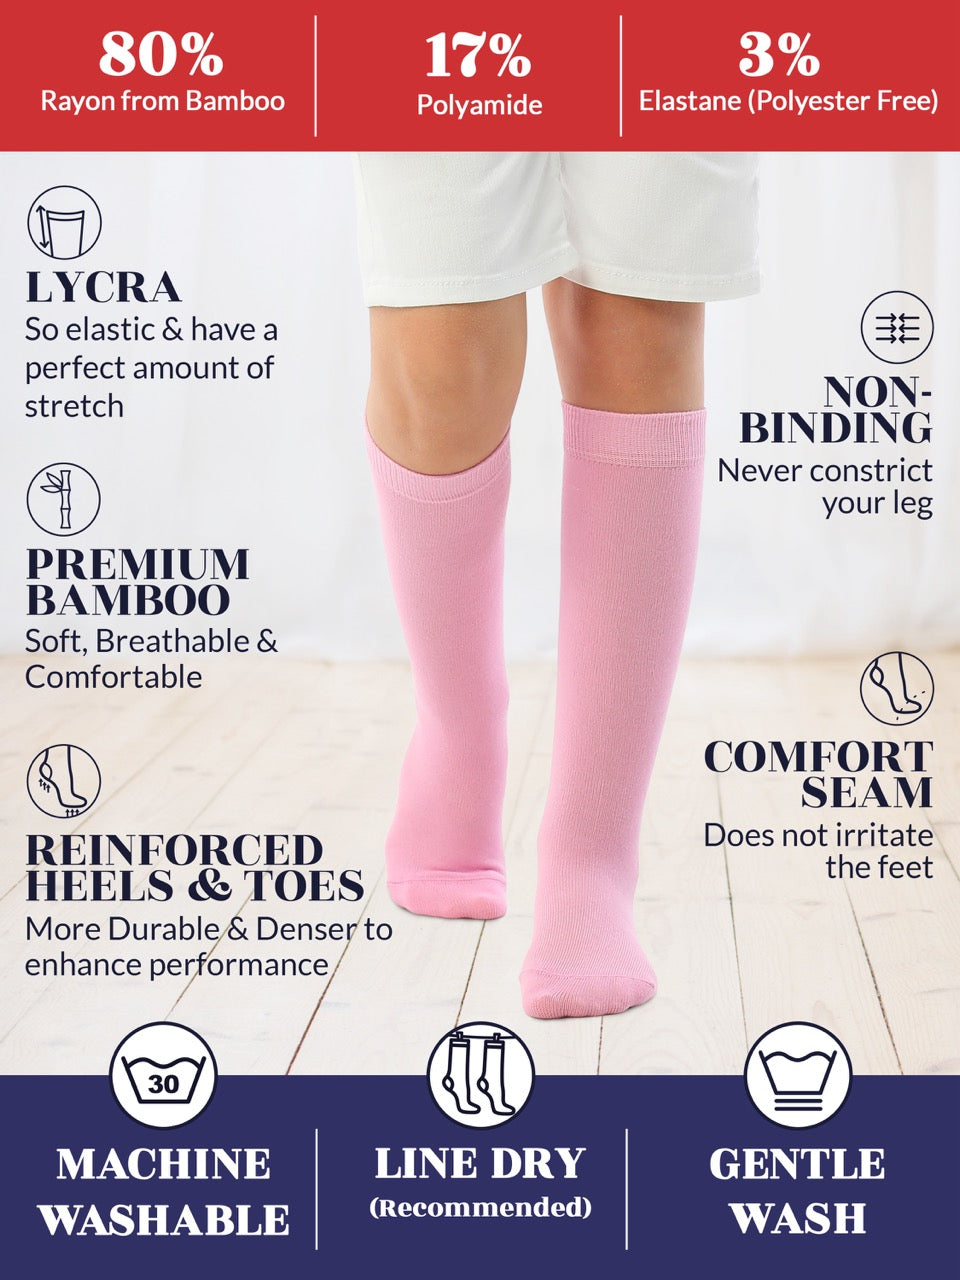 Experience the ultimate comfort and style with Hugh Ugoli Kids Bamboo School Socks. These pink socks perfect for school or everyday wear, our high-quality knee-high socks meet uniform standards while reducing blisters and staying in place. Available in four sizes for children aged 3-14 years